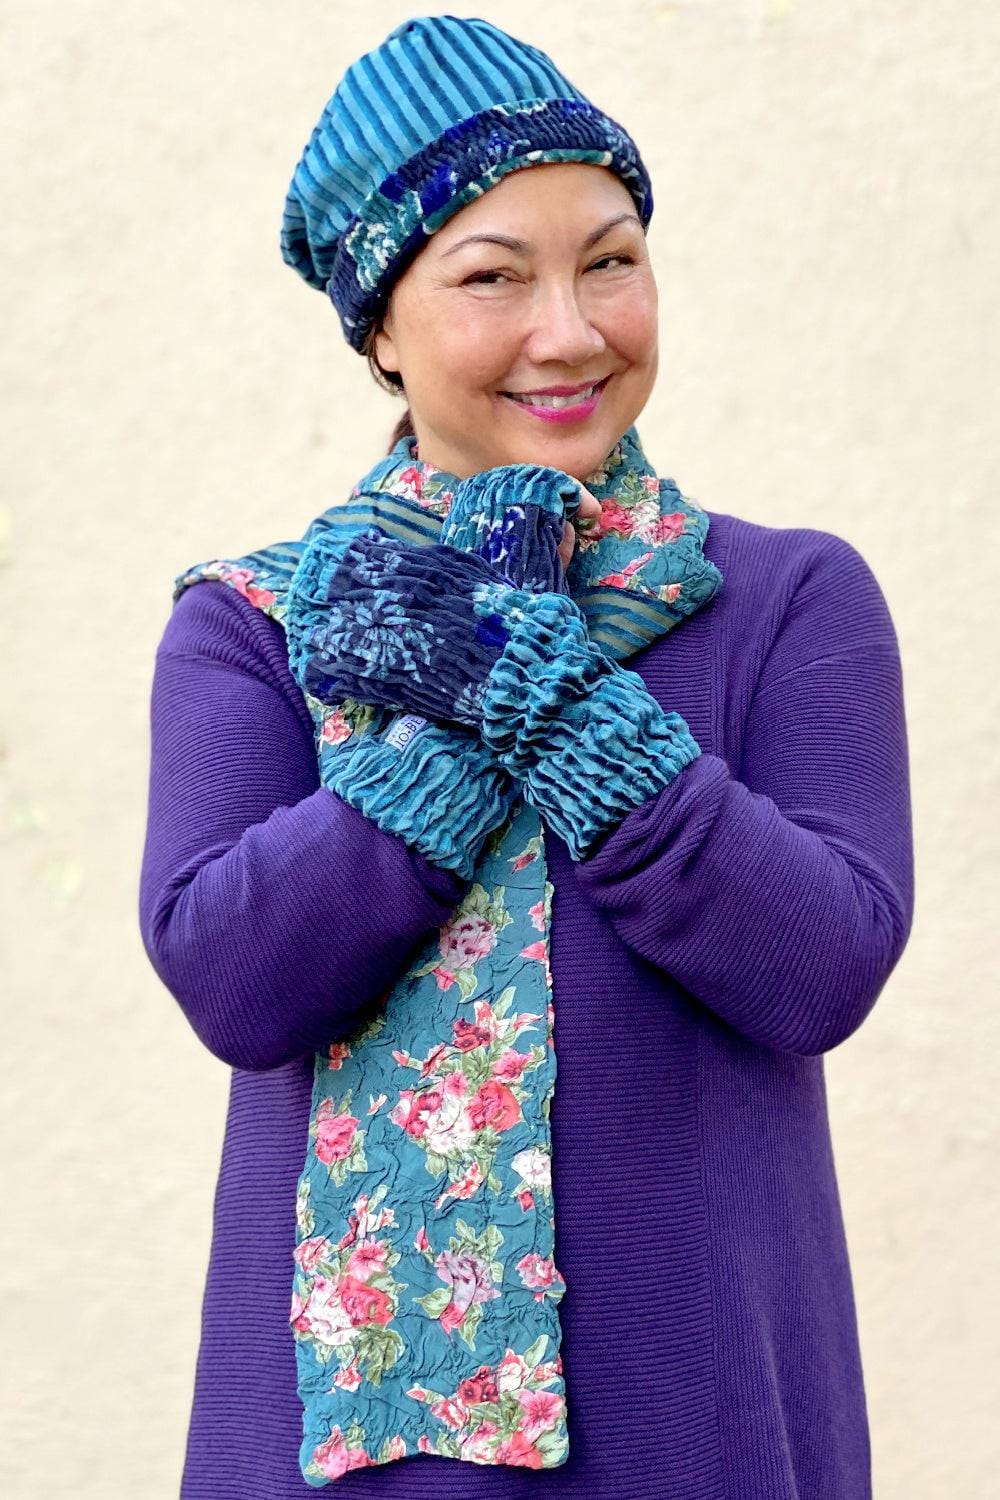 Woman's winter velvet hat reversible floral and stripe looks cute with velvet cuff gloves and reversible scarf.